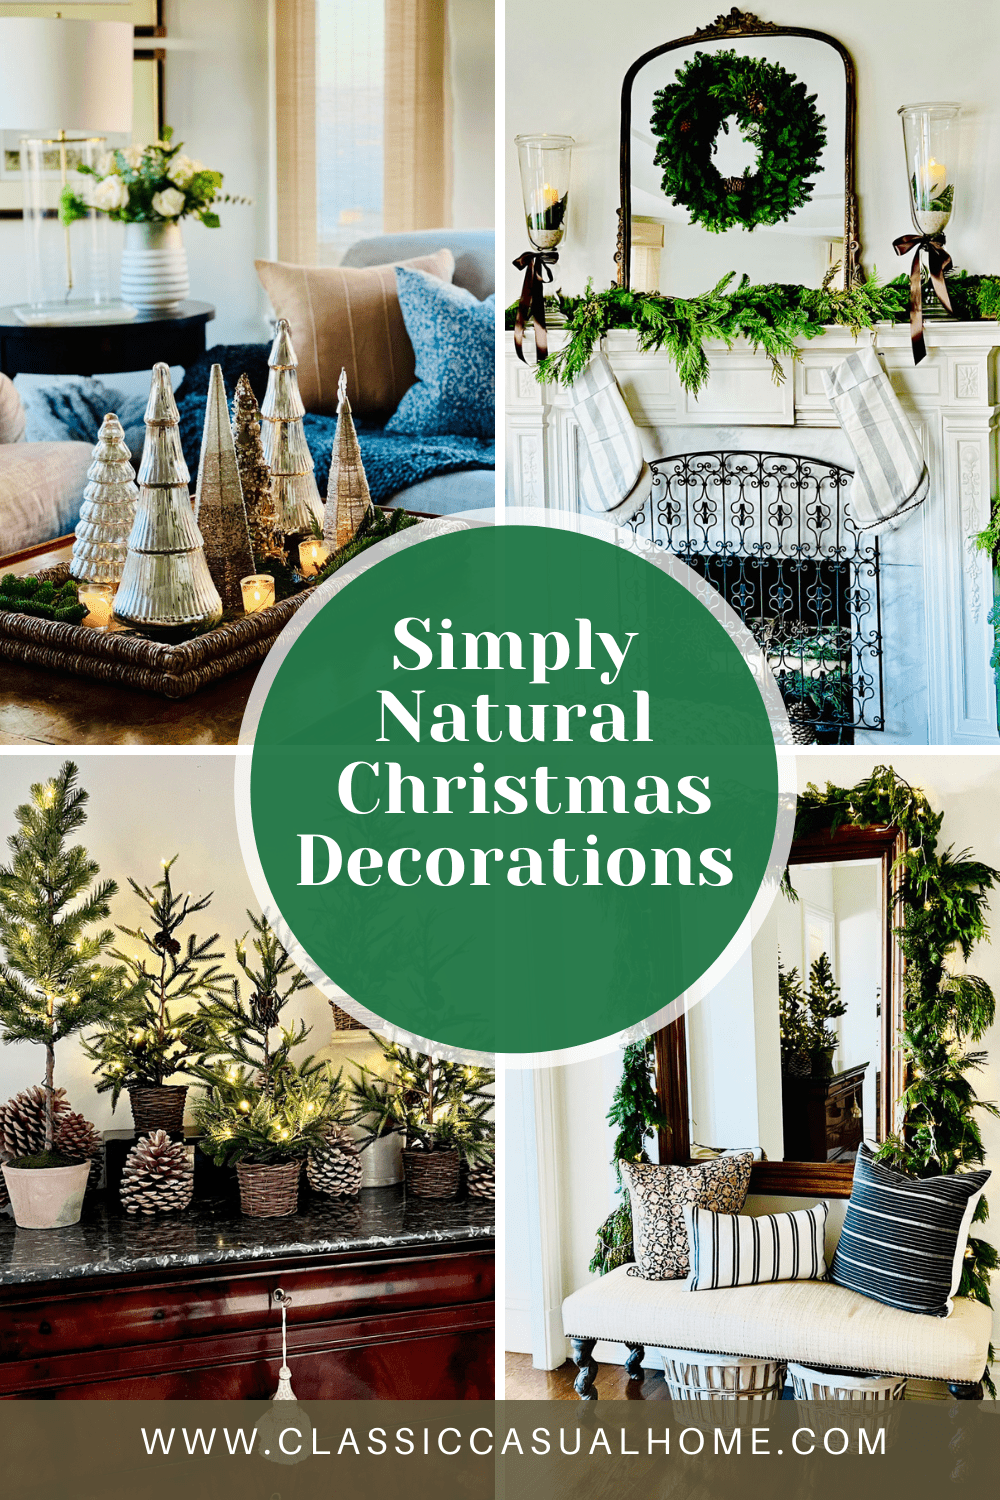 Simply Natural Holiday Décor